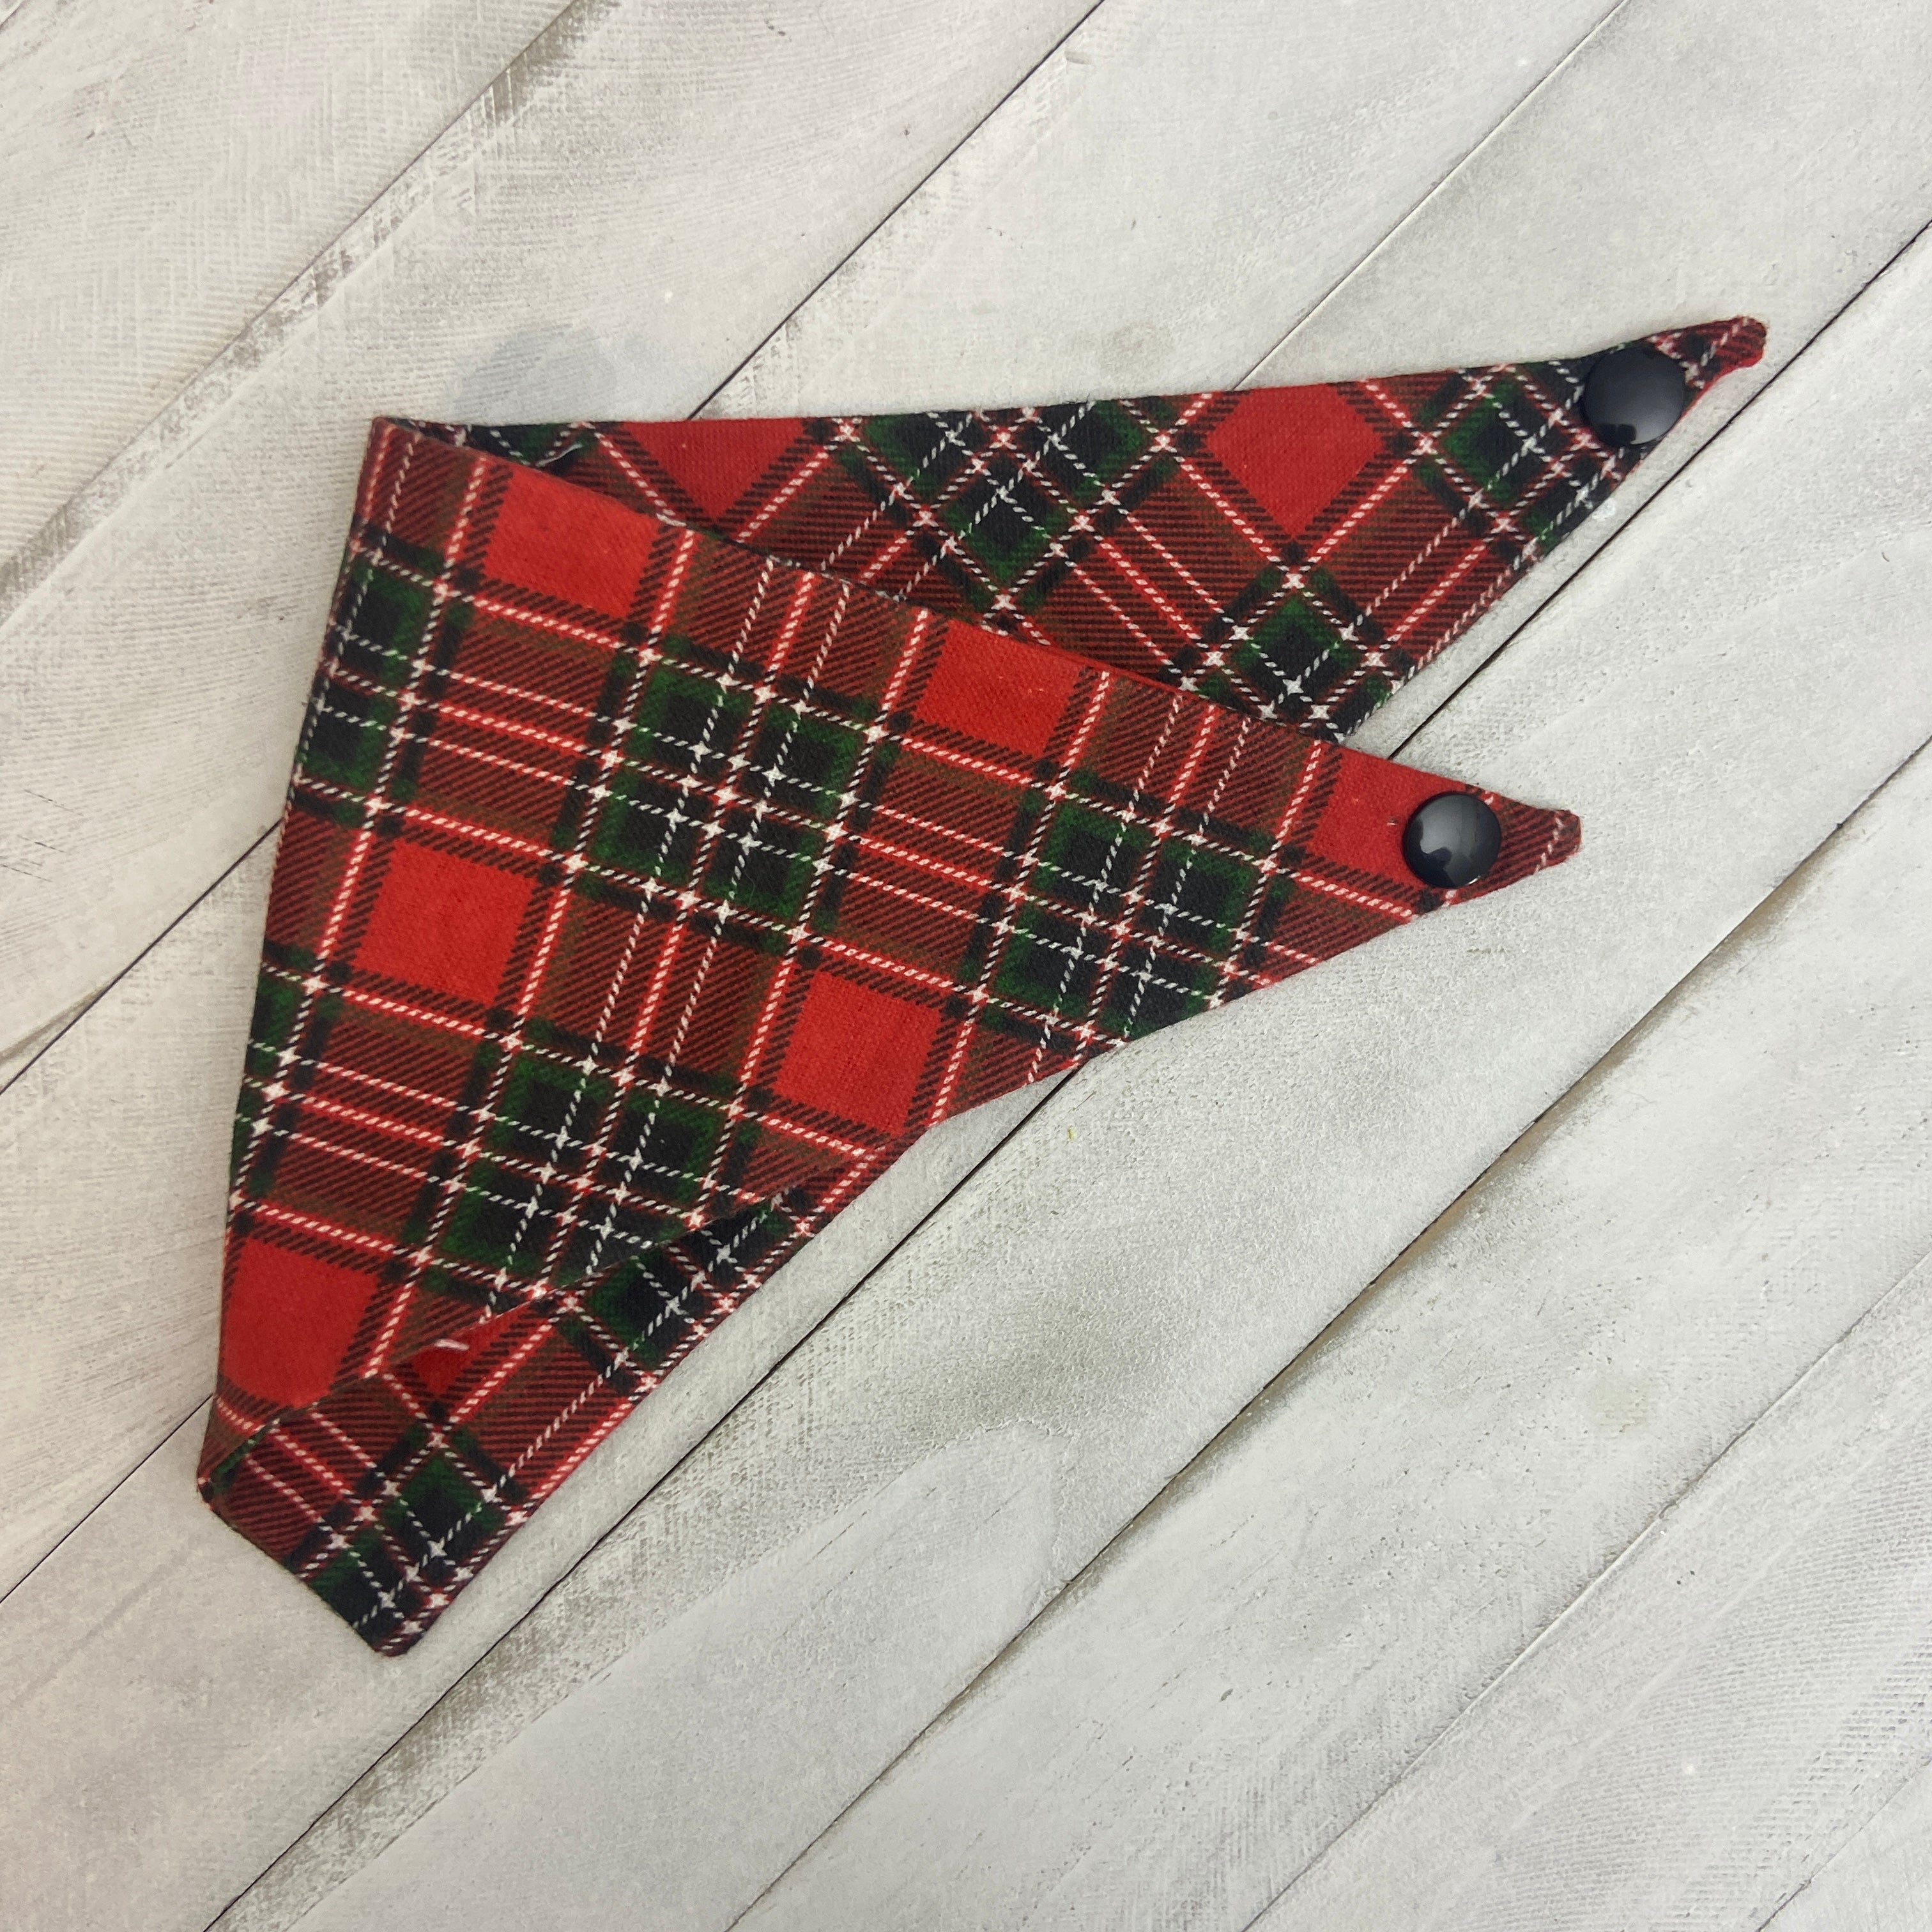 Pet Bandana - Red and Green Plaid Flannel